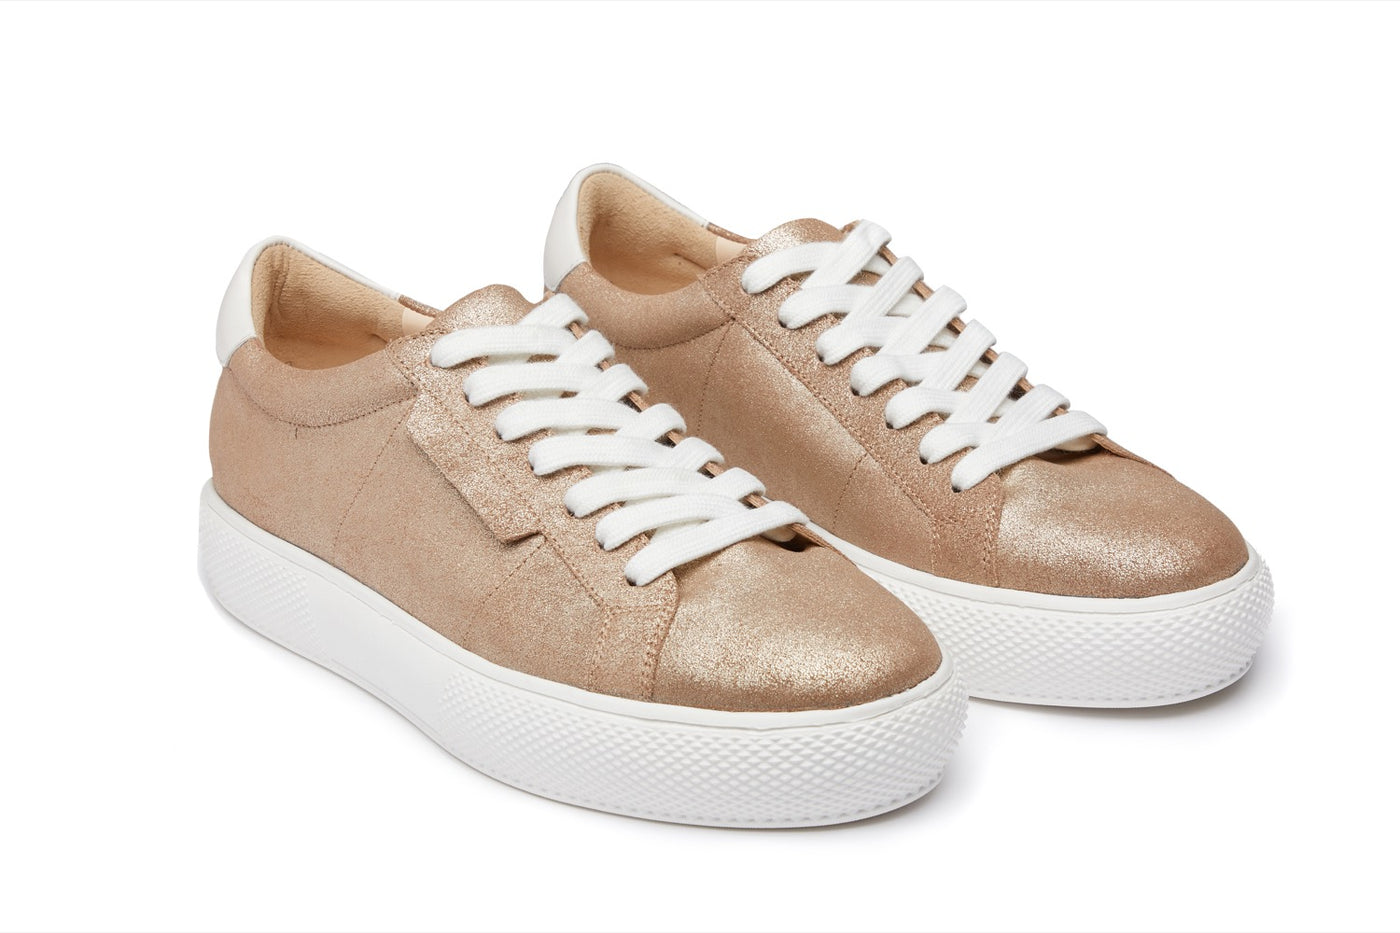 Pair of  women's low top leather trainer in bronze gold with white laces and trims